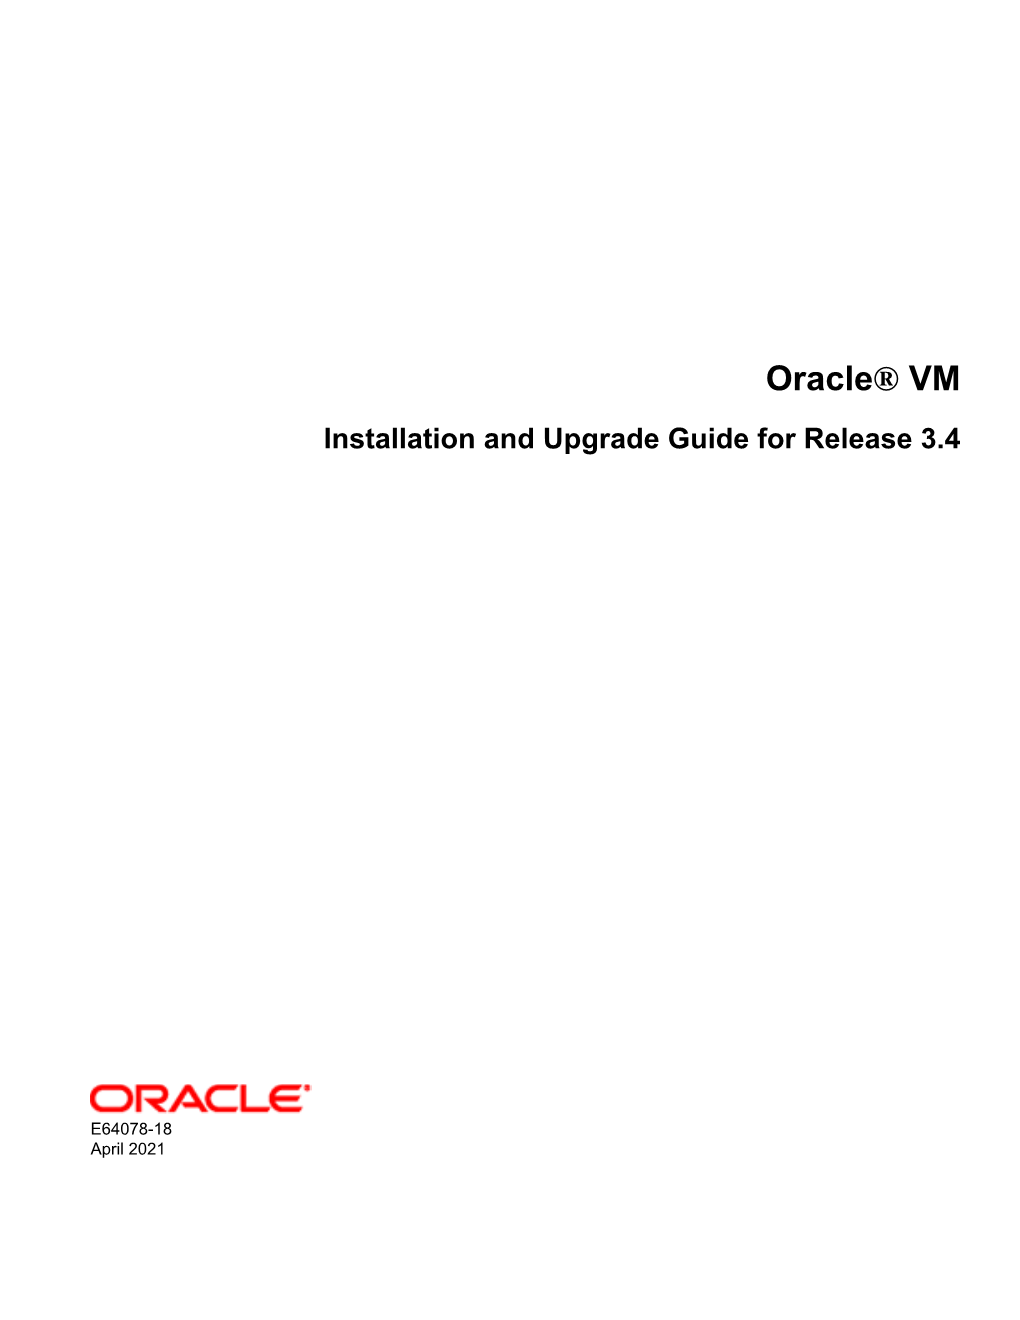 Oracle® VM Installation and Upgrade Guide for Release 3.4